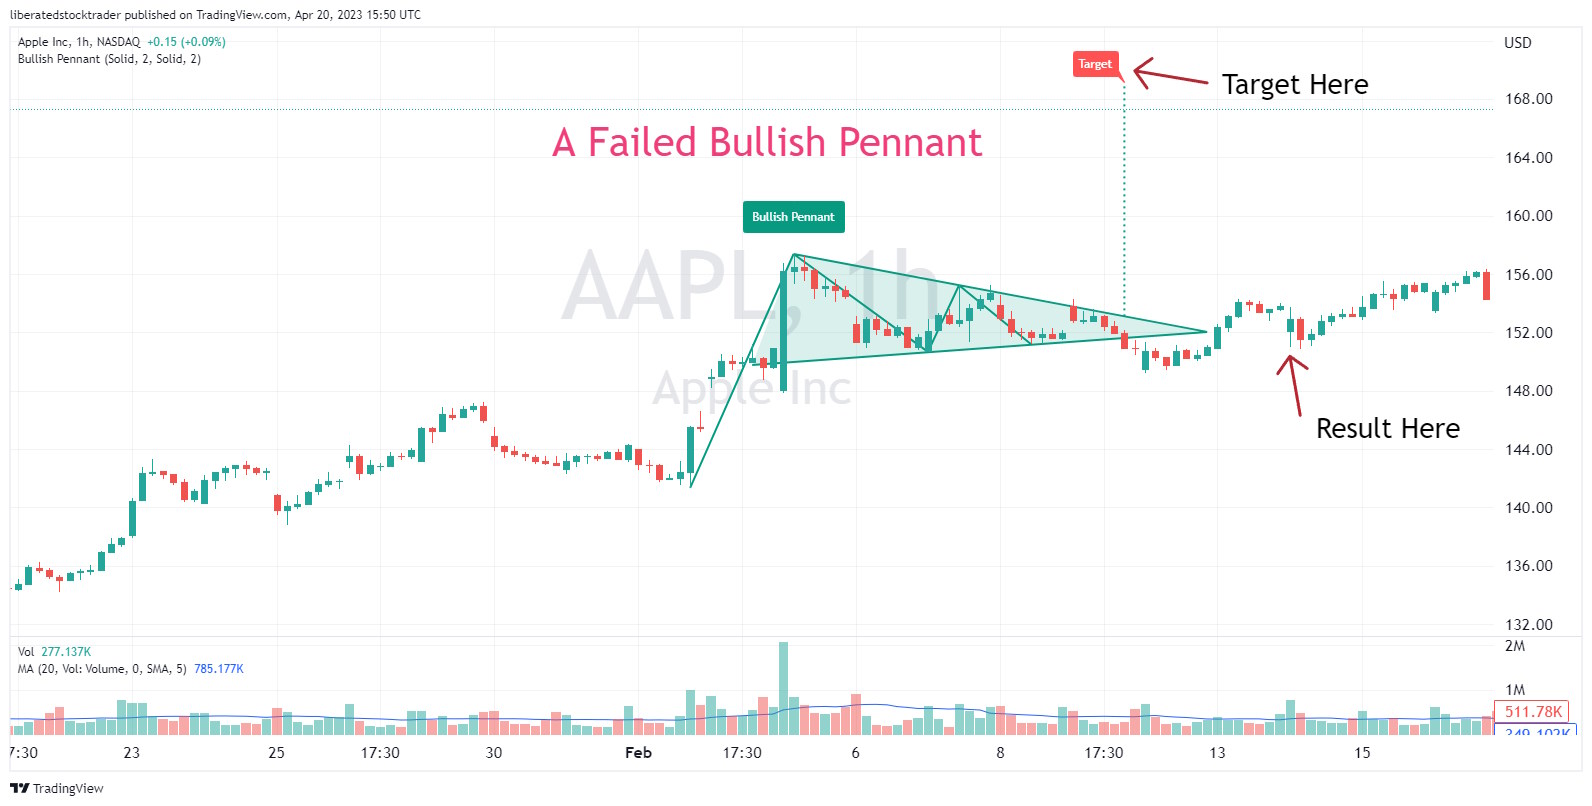 Bullish Pennant Chart Confirms It Is Unreliable